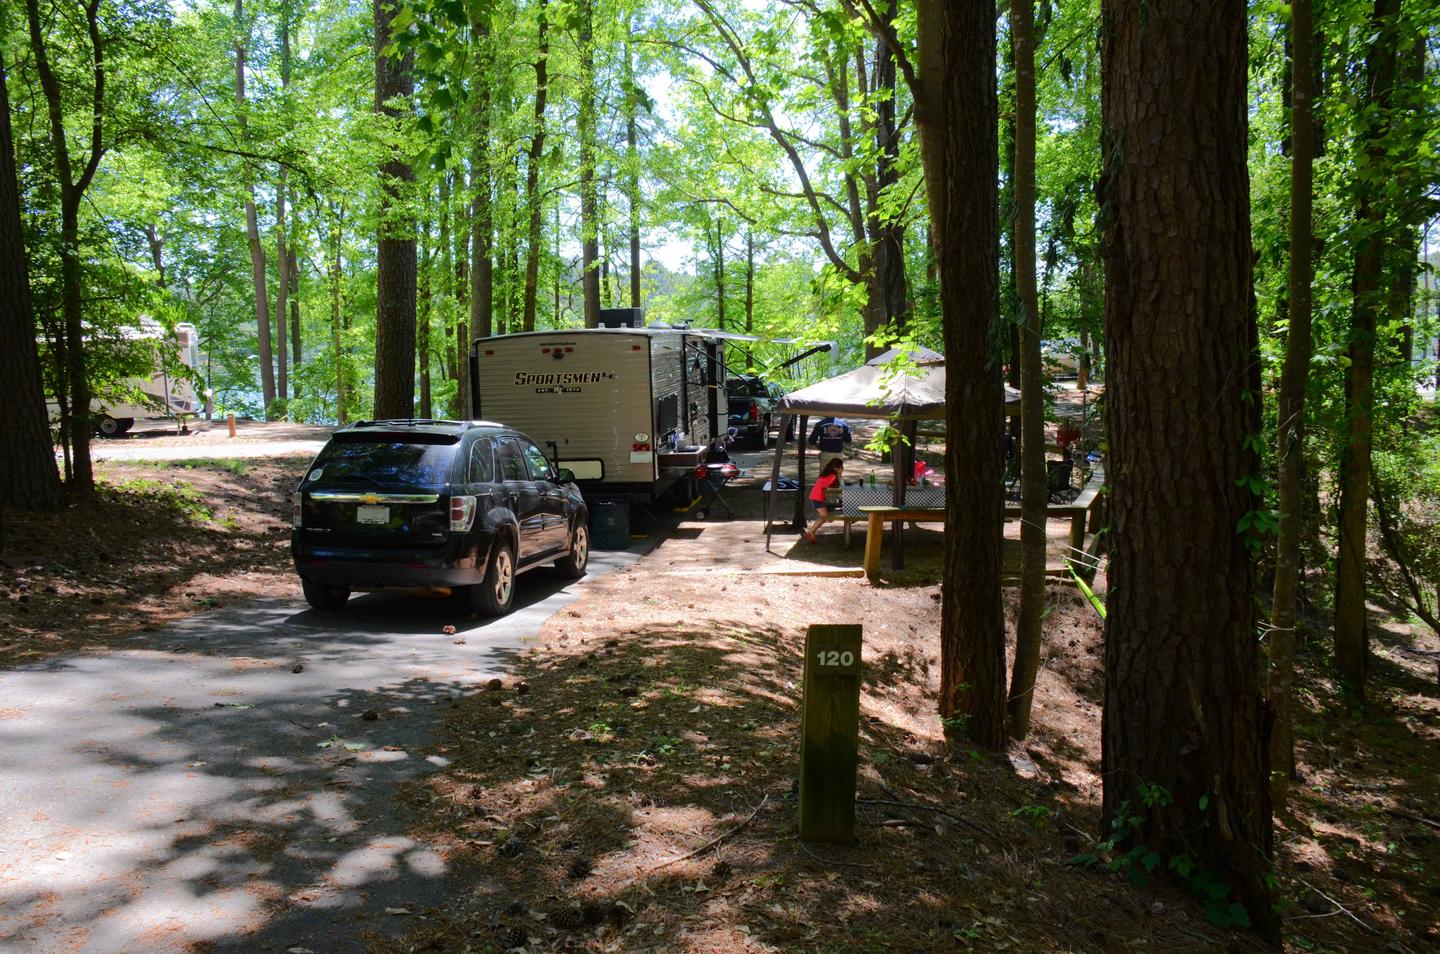 Pull-thru entrance, driveway slope, awning clearance.McKinney Campground, campsite 120.